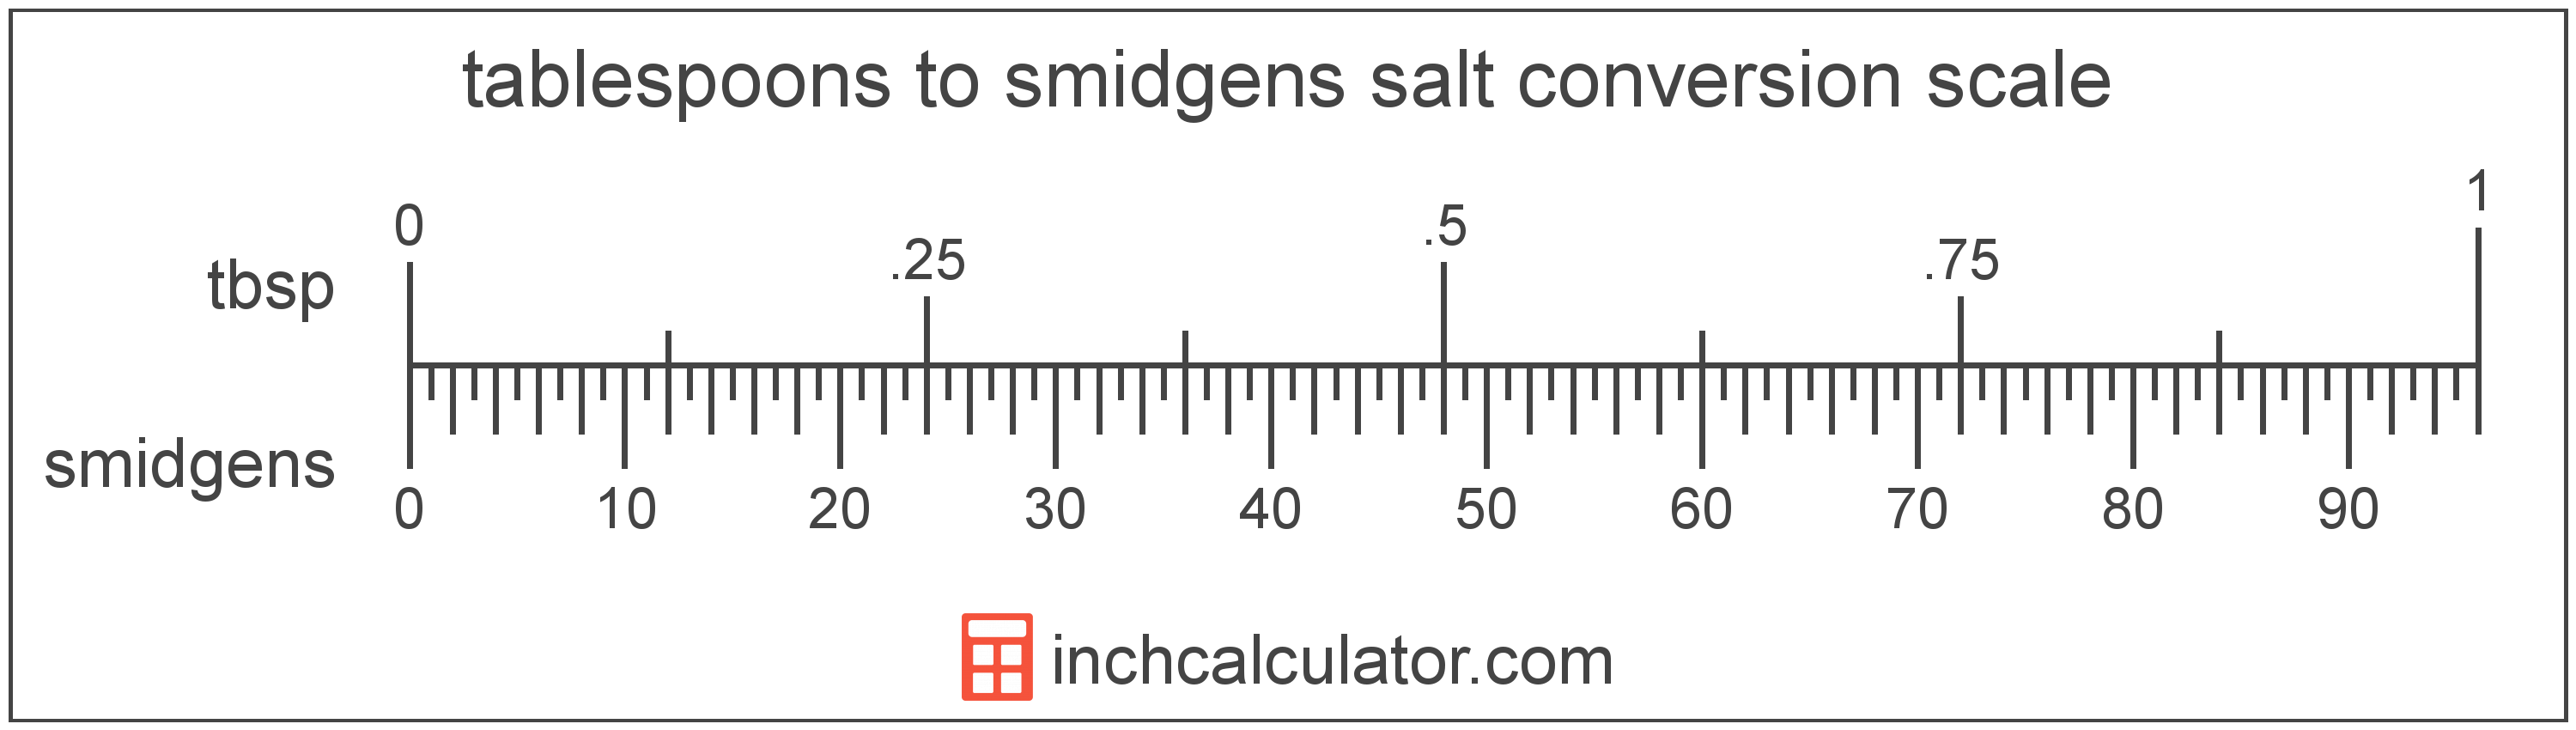 conversion scale showing smidgens and equivalent tablespoons amount of salt values